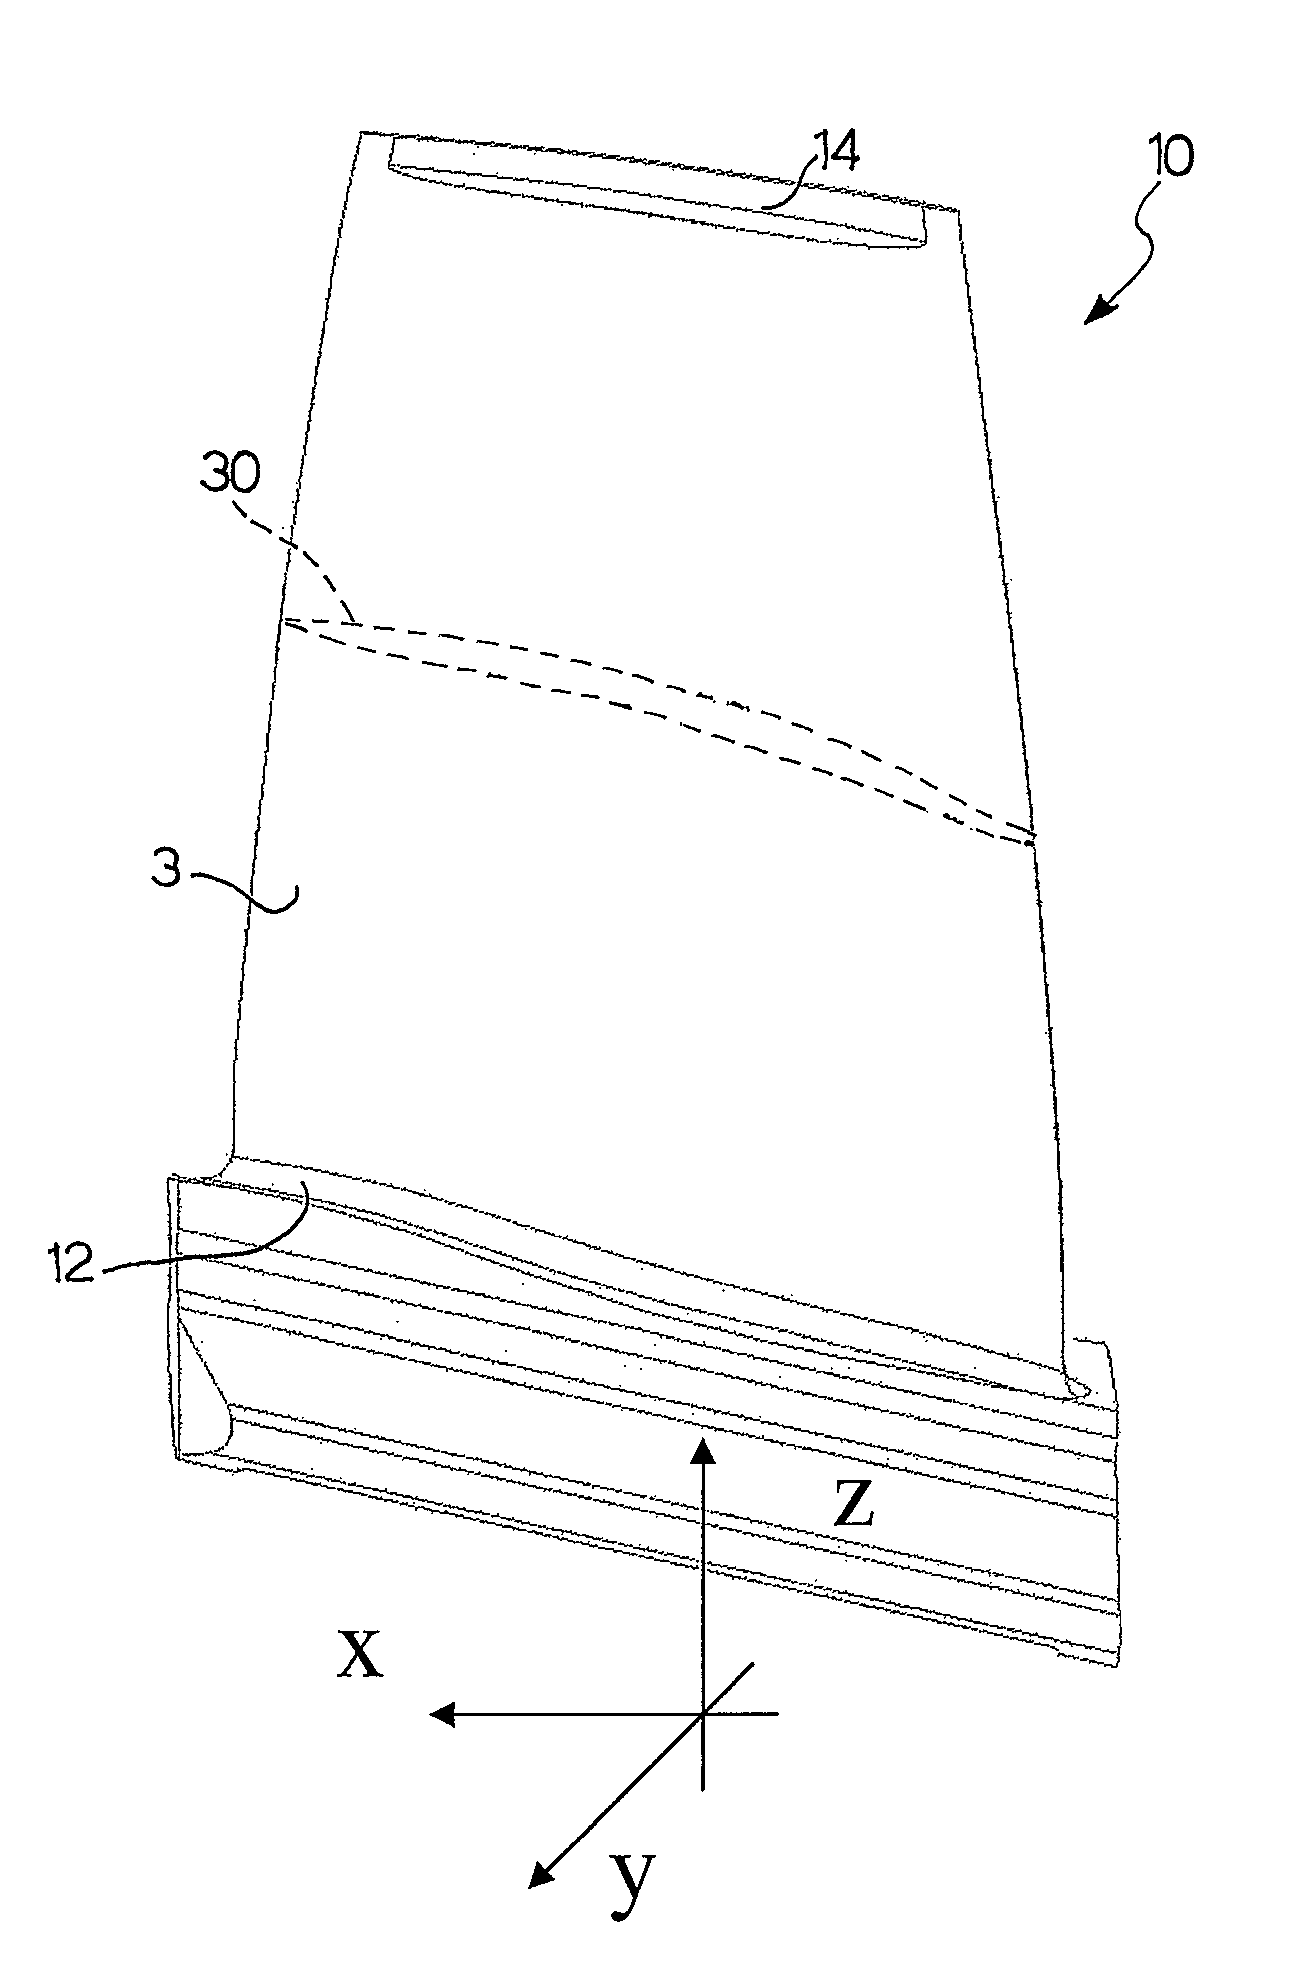 Rotor blade for a second stage of a compressor